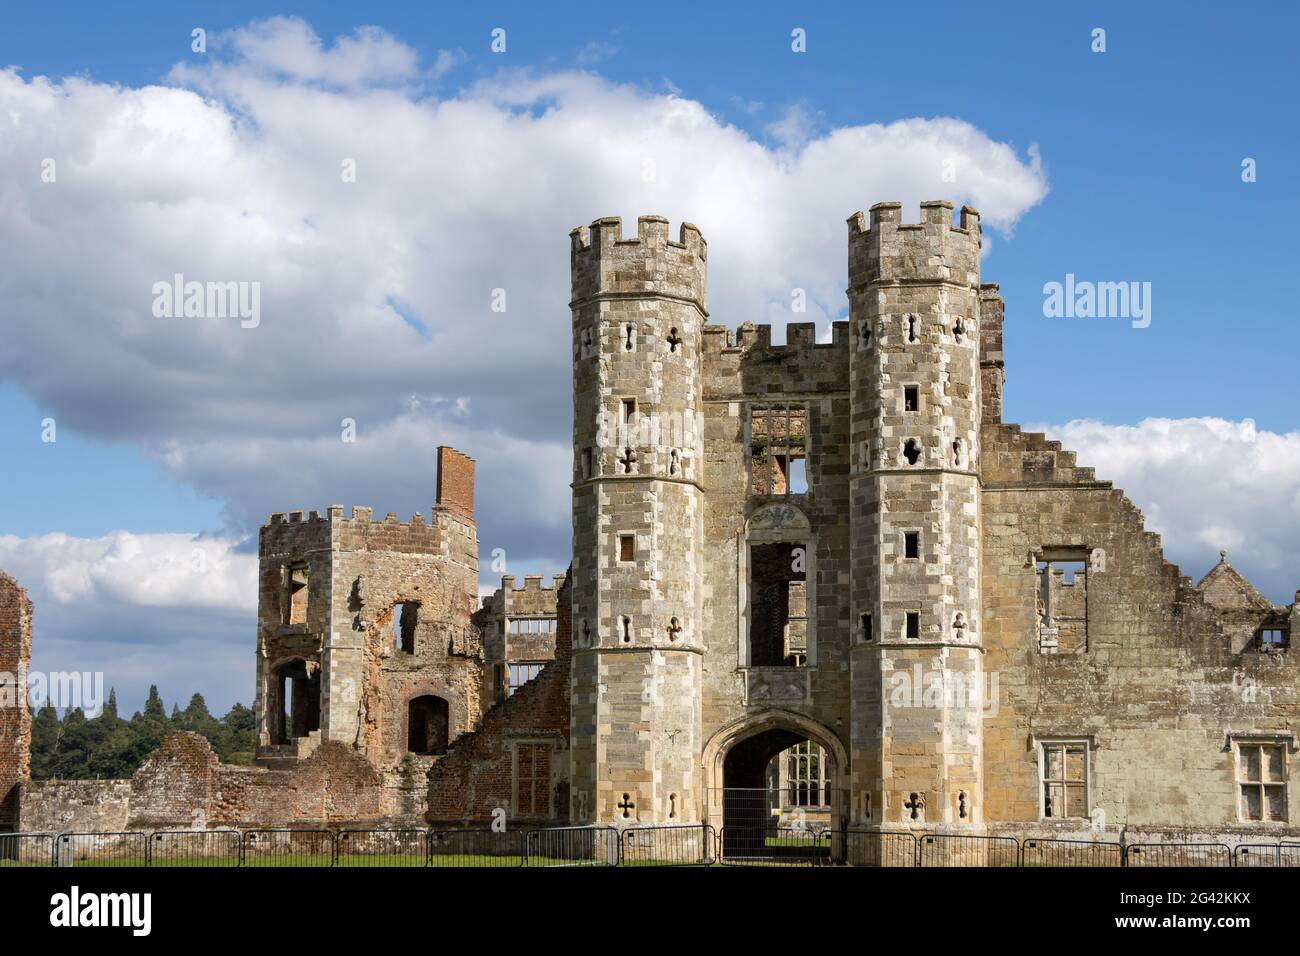 MIDHURST, WEST SUSSEX/UK - SEPTEMBER 1 : View of the Cowdray Castle ruins in Midhurst, West Sussex on September 1, 2020 Stock Photo